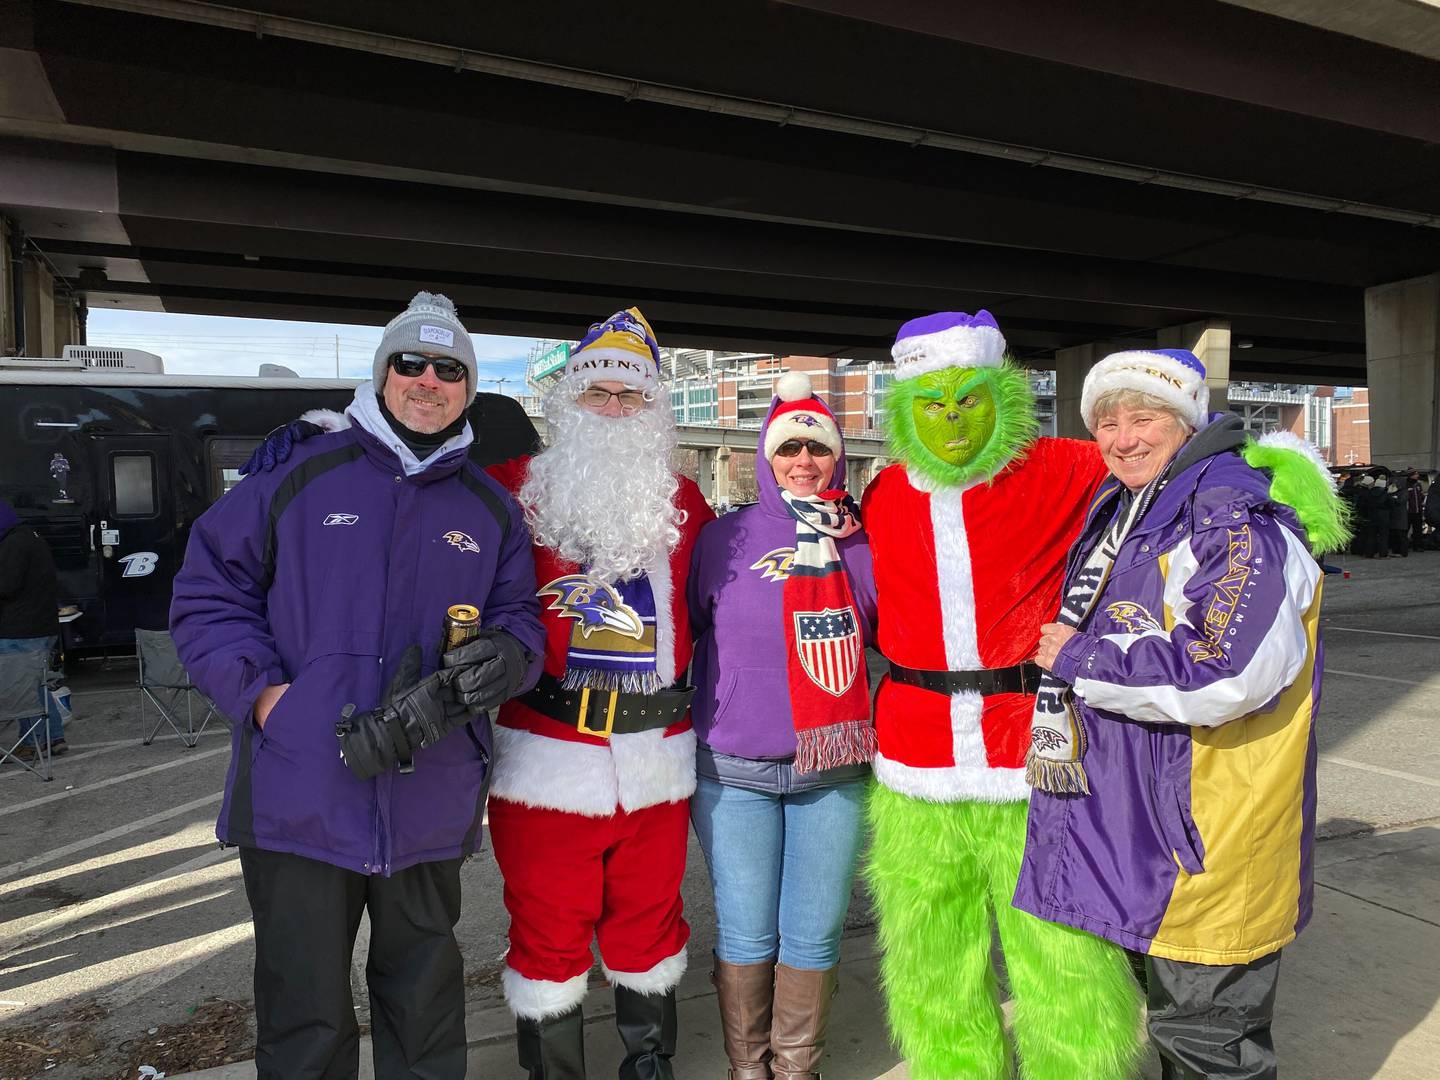 Ravens fans bundle up in purple garb and Christmas costumes ahead of the 1 p.m. game against the Atlanta Falcons.